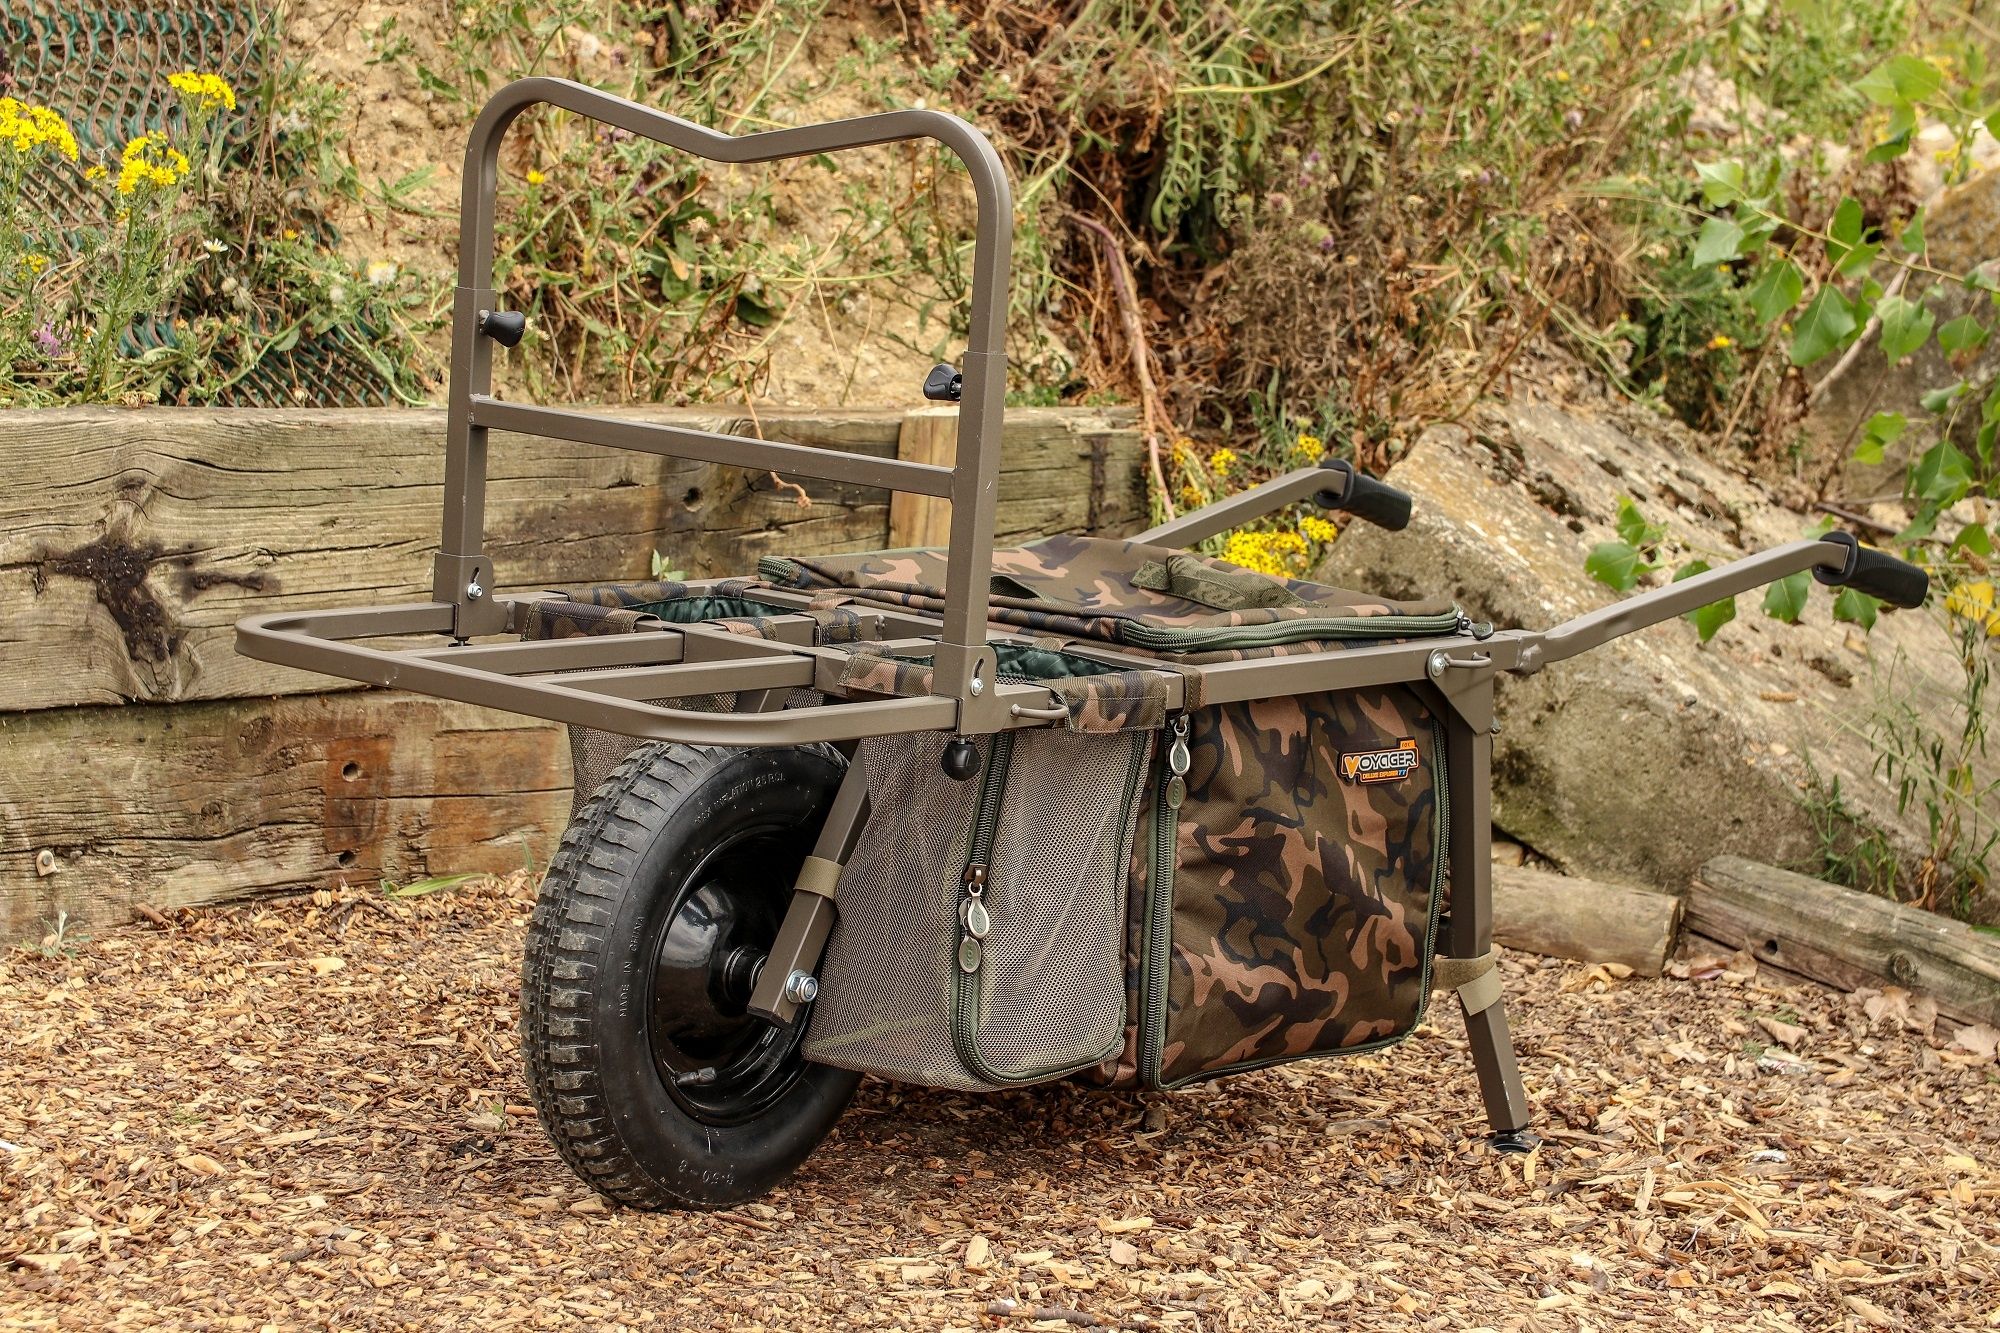 Fox Explorer Barrow Deluxe Camolite TT - A Total Fishing Tackle Review!